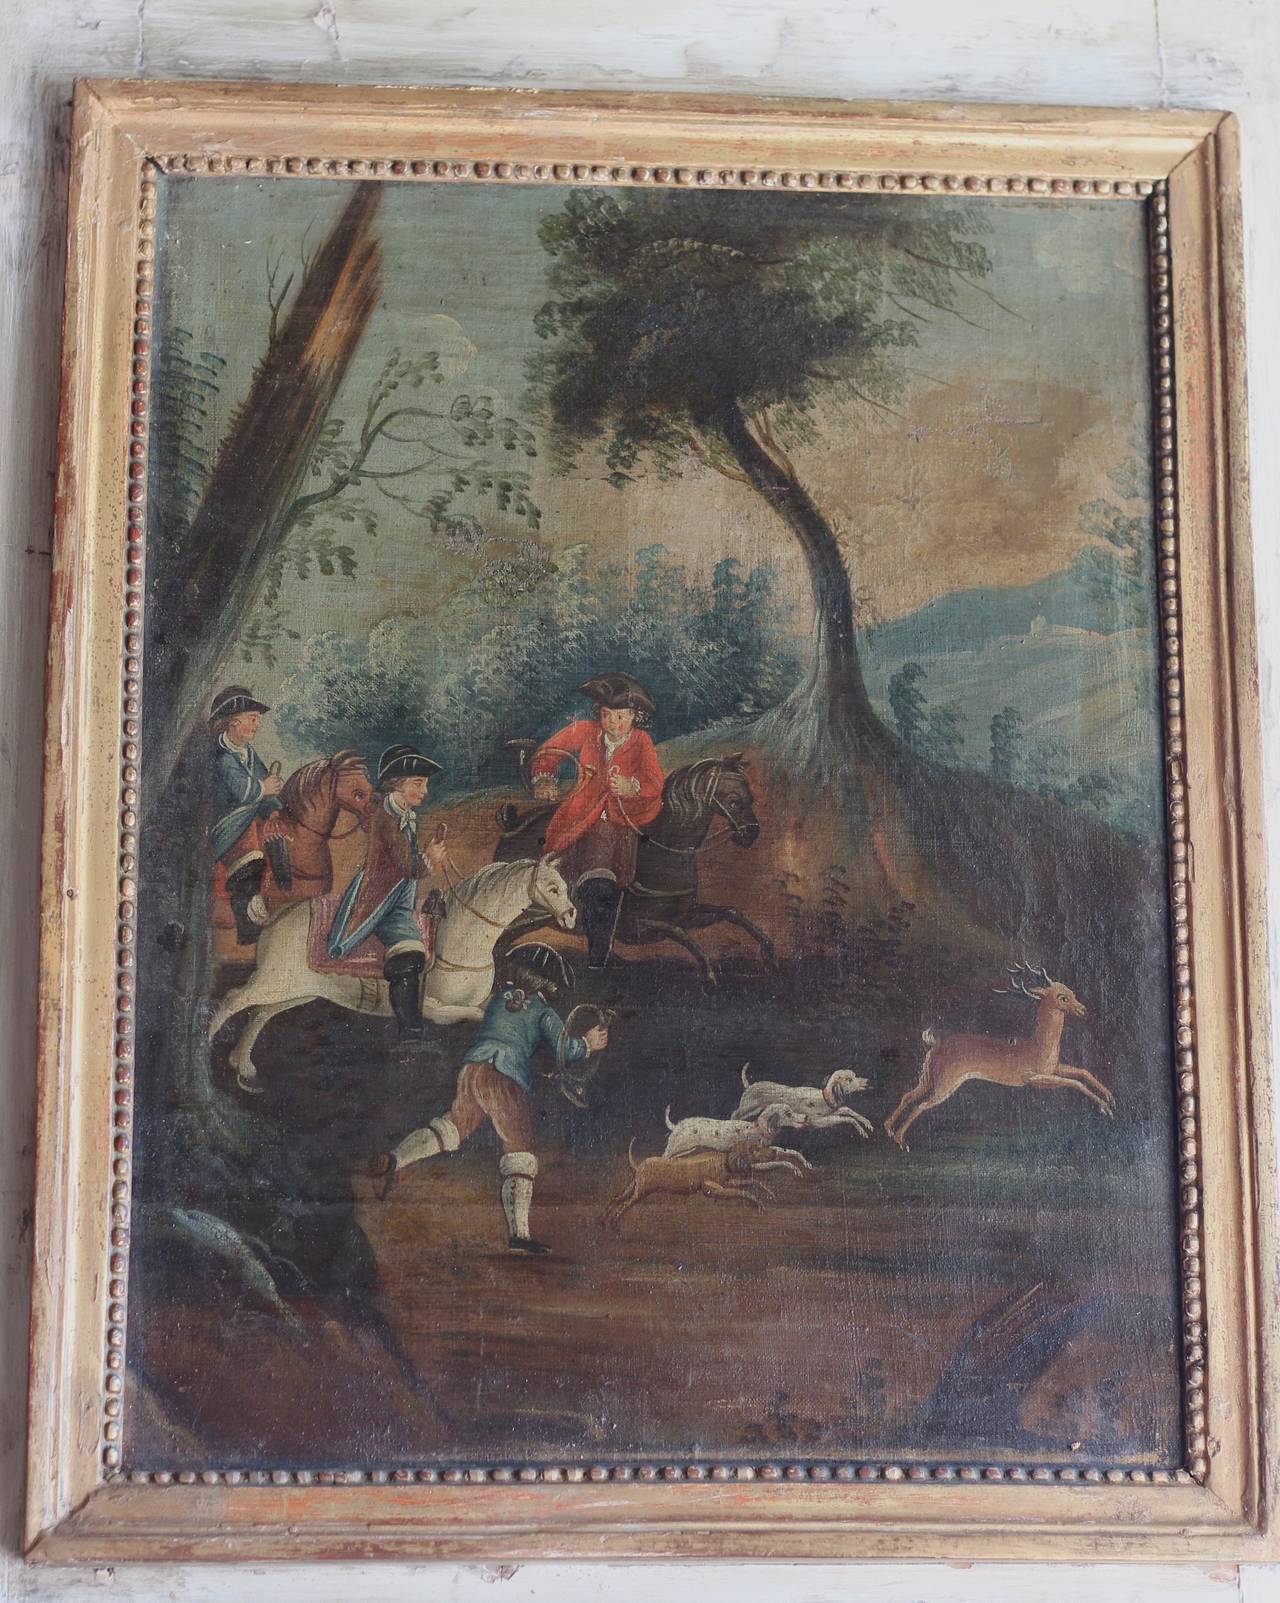 Beautiful 18th Century Trumeau Mirror with gilt wood molding.  Oil on canvas.  Woodland landscape painting of riders in red jackets and animals.